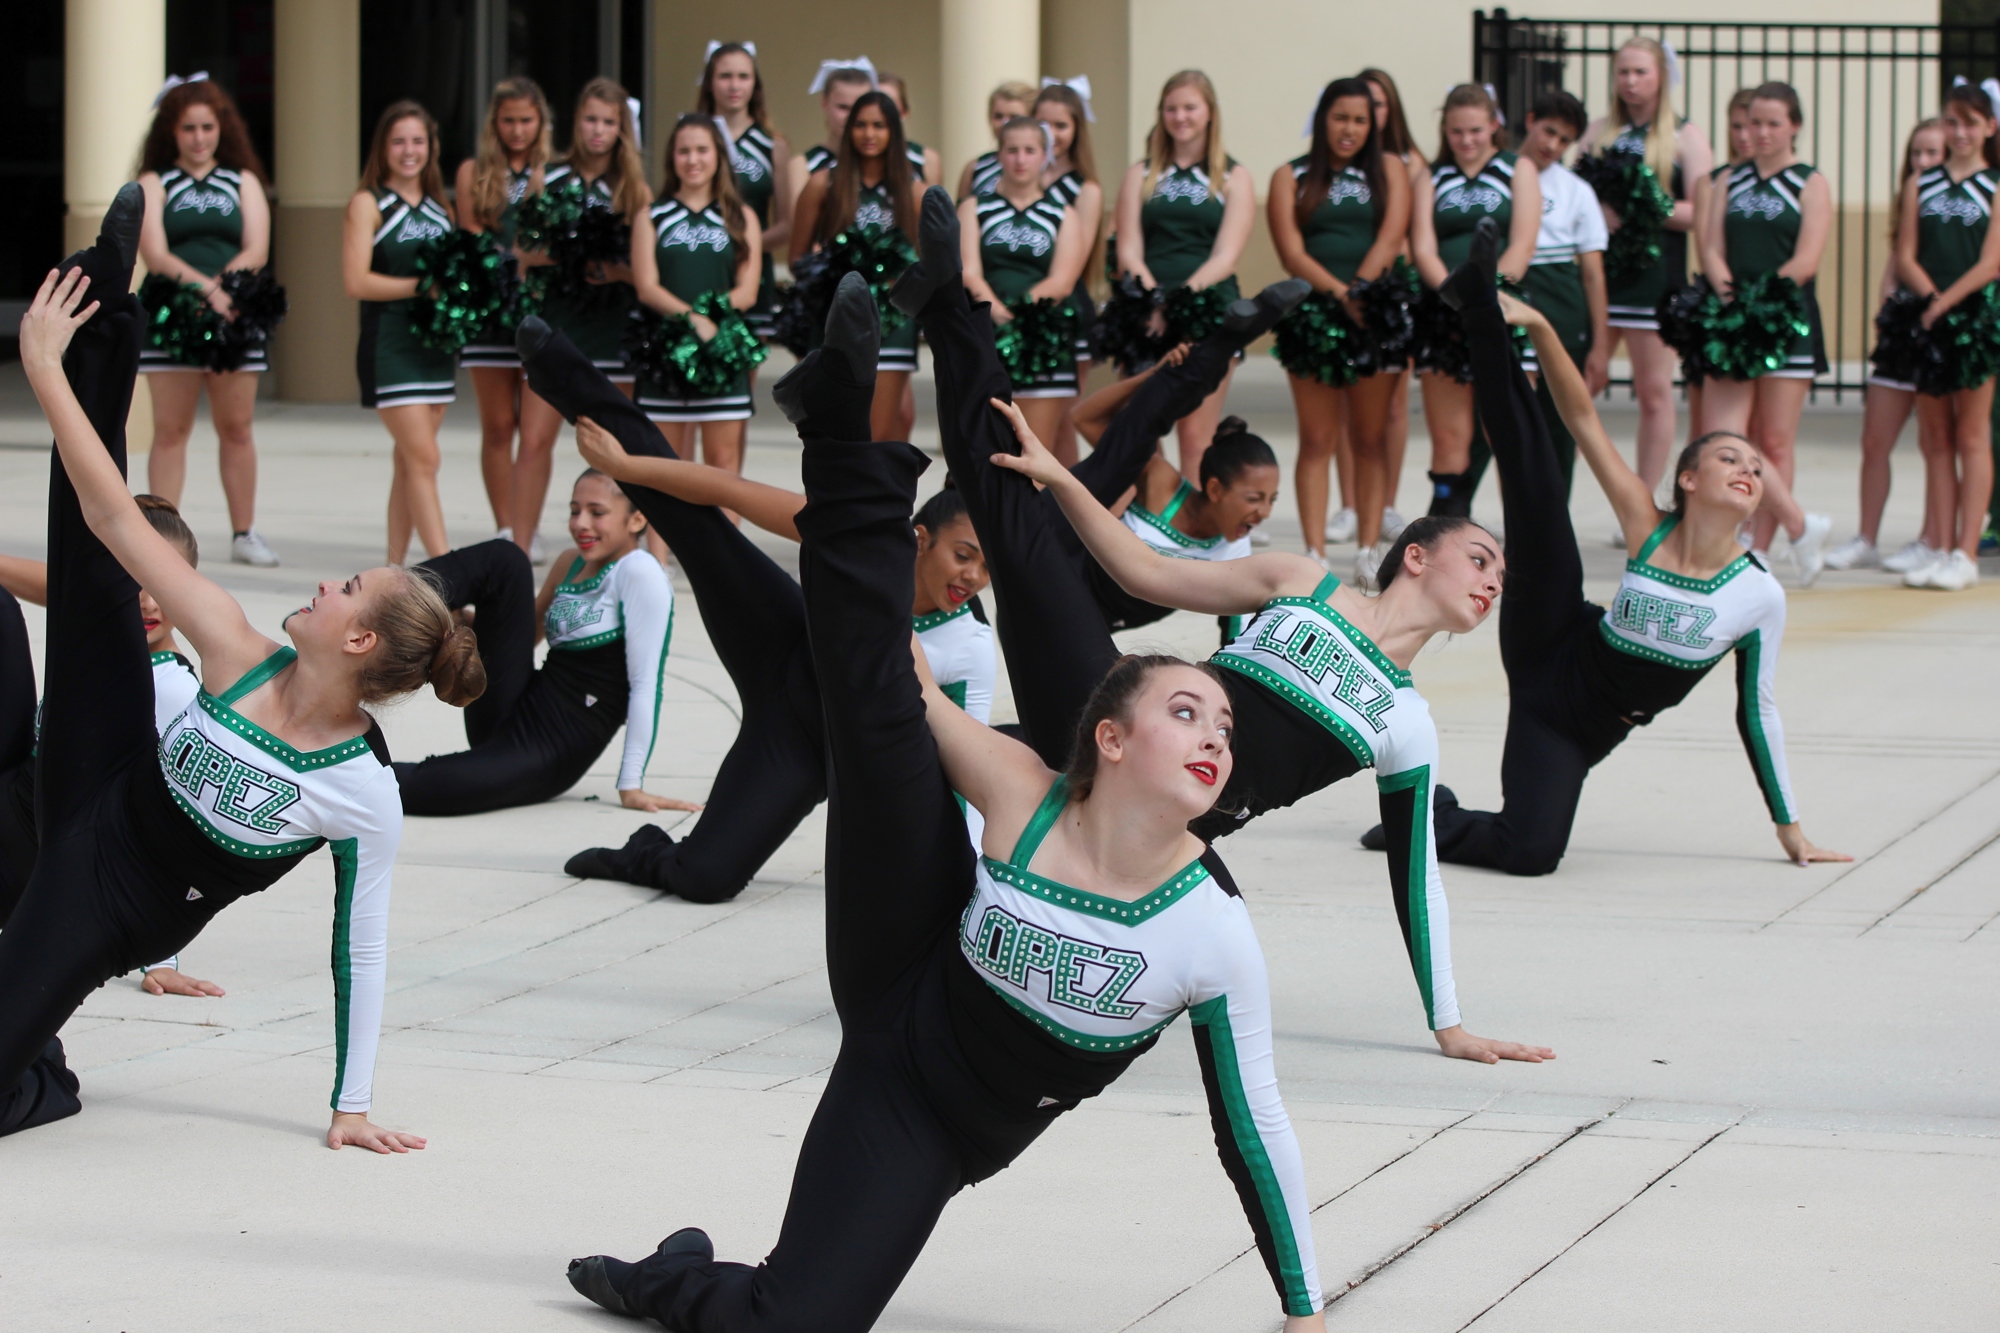 Dancers and cheerleaders perform routines at the cross country's championship pep assembly.